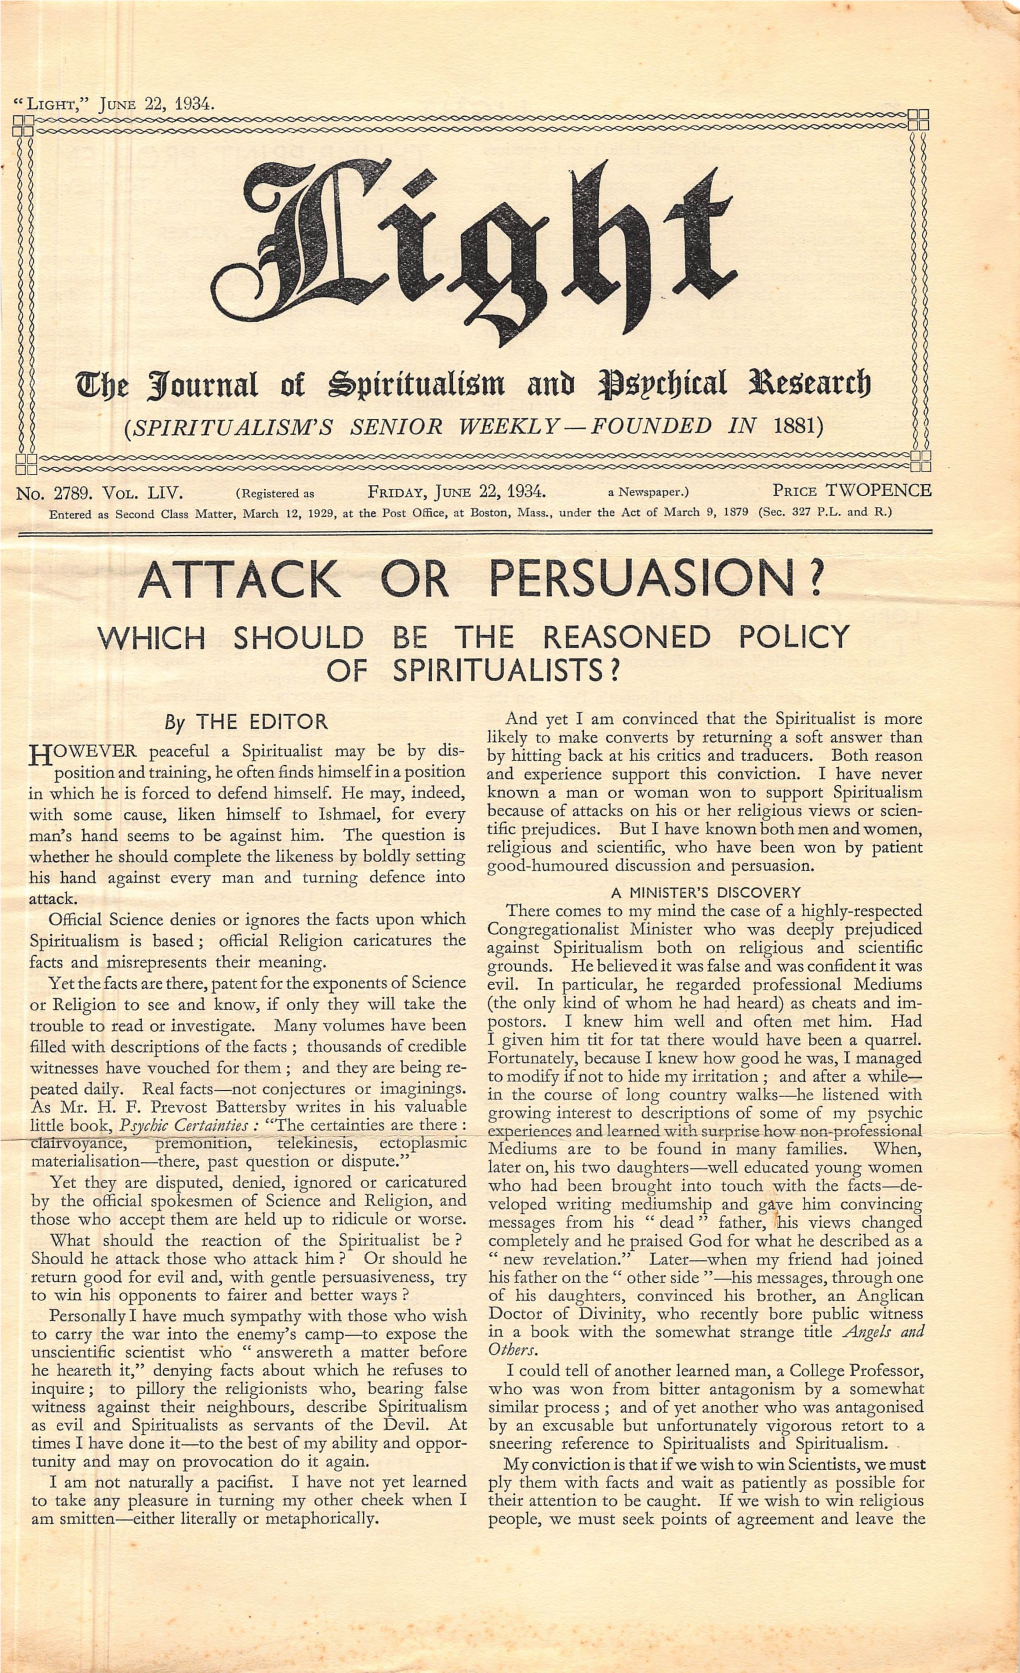 Attack Or Persuasion ? Which Should Be the Reasoned Policy of Spiritualists?